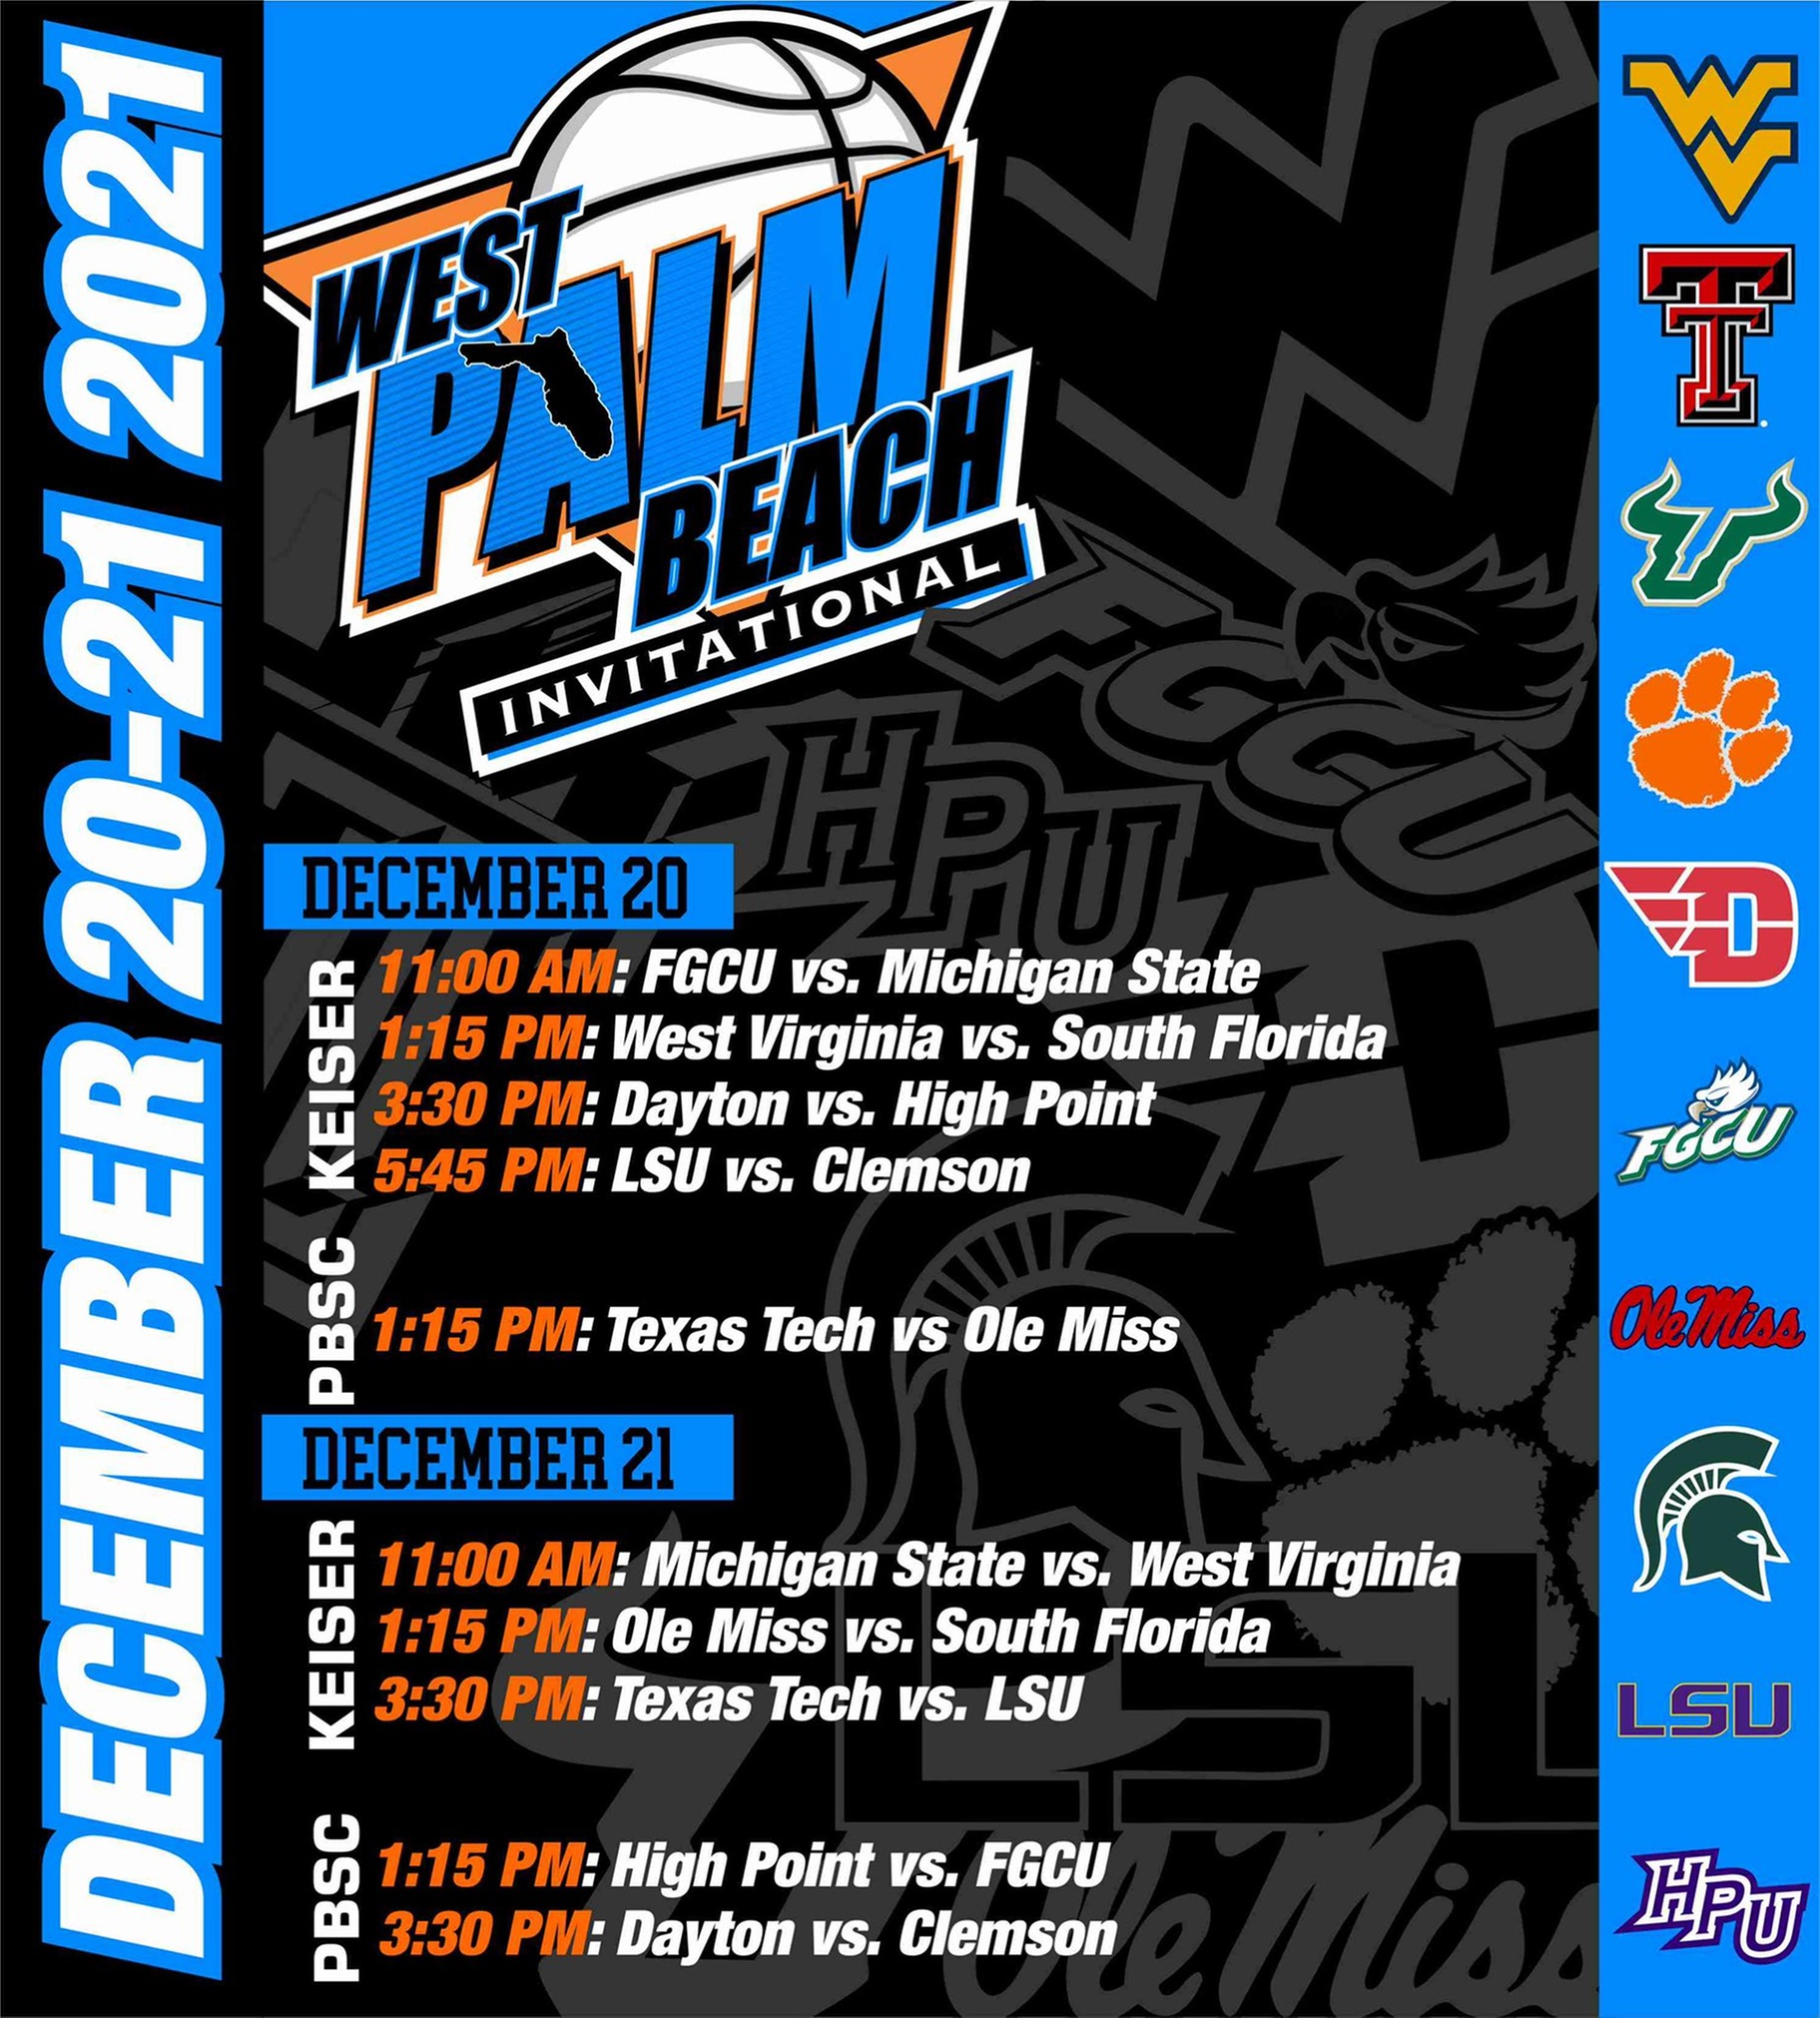 PBSC to Hold West Palm Beach Invitational December 20-21